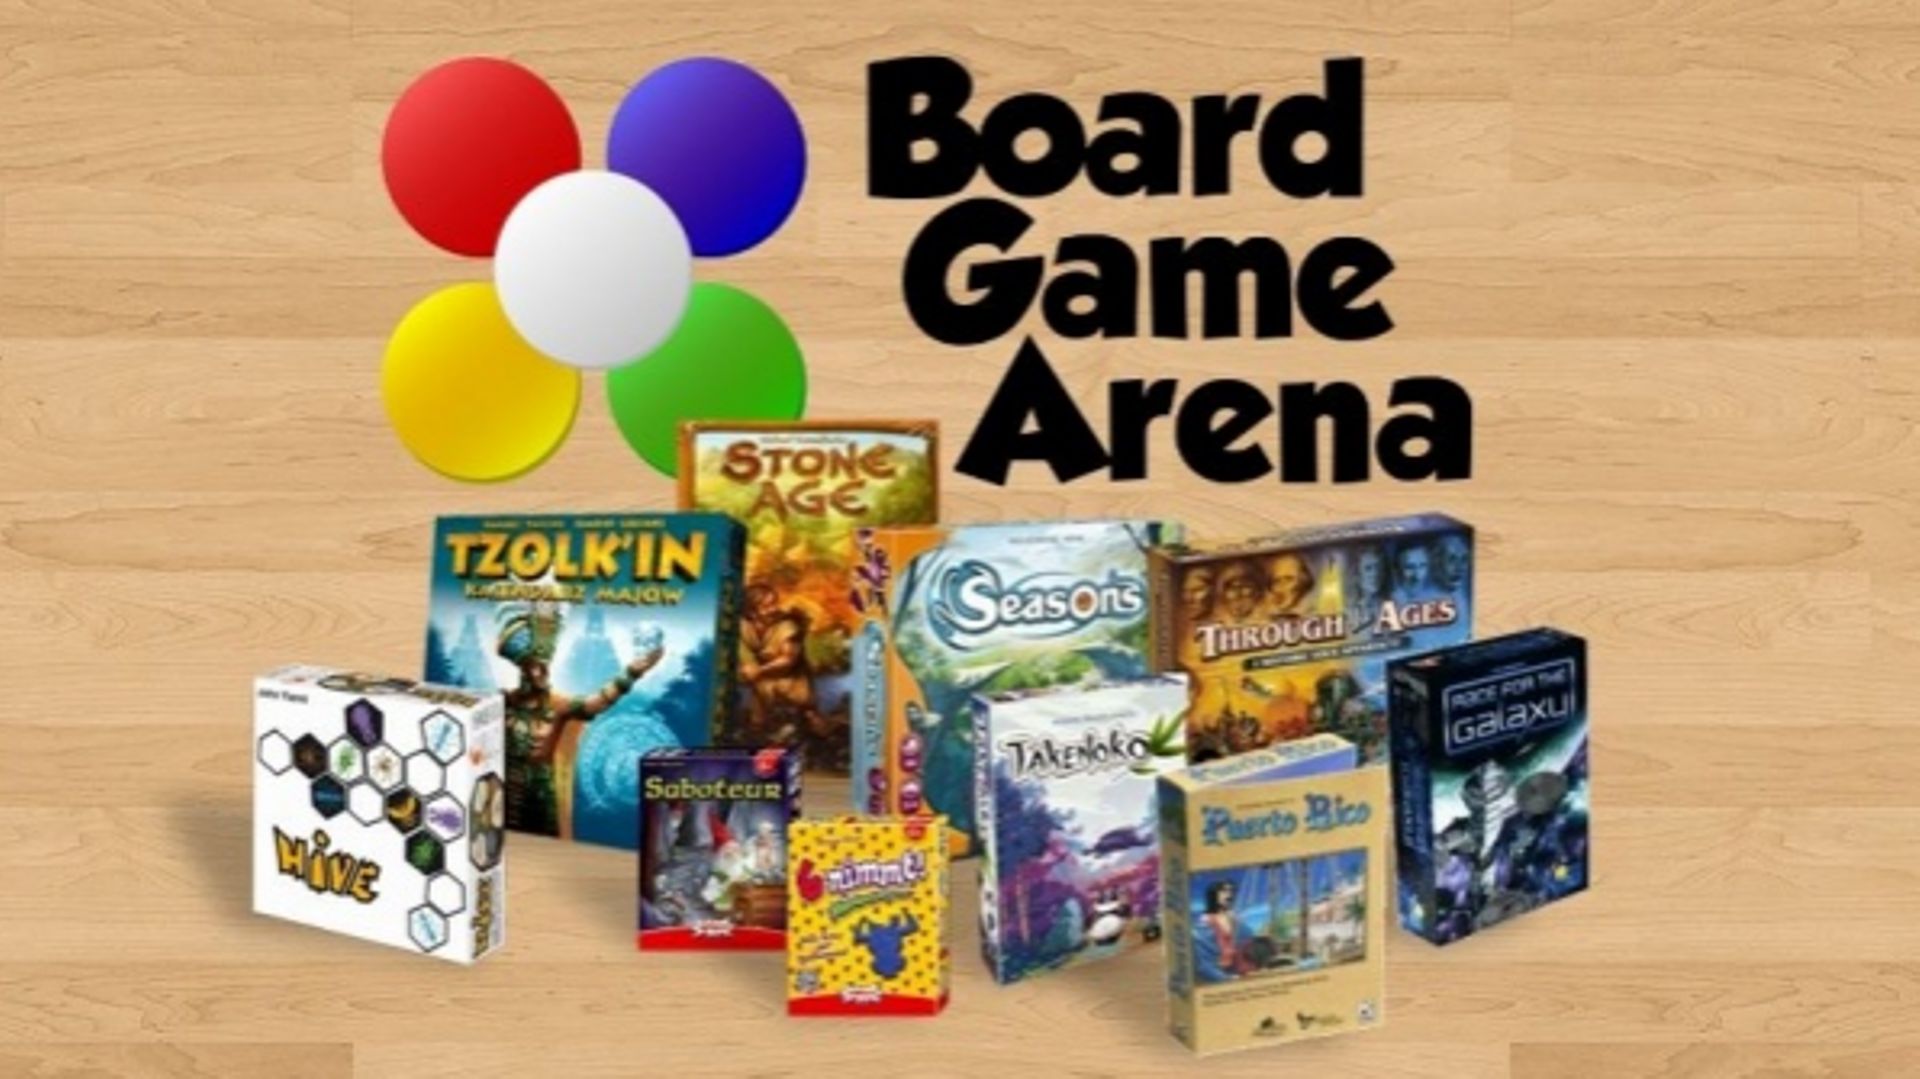 Board Game Arena, the online board game platform has grown